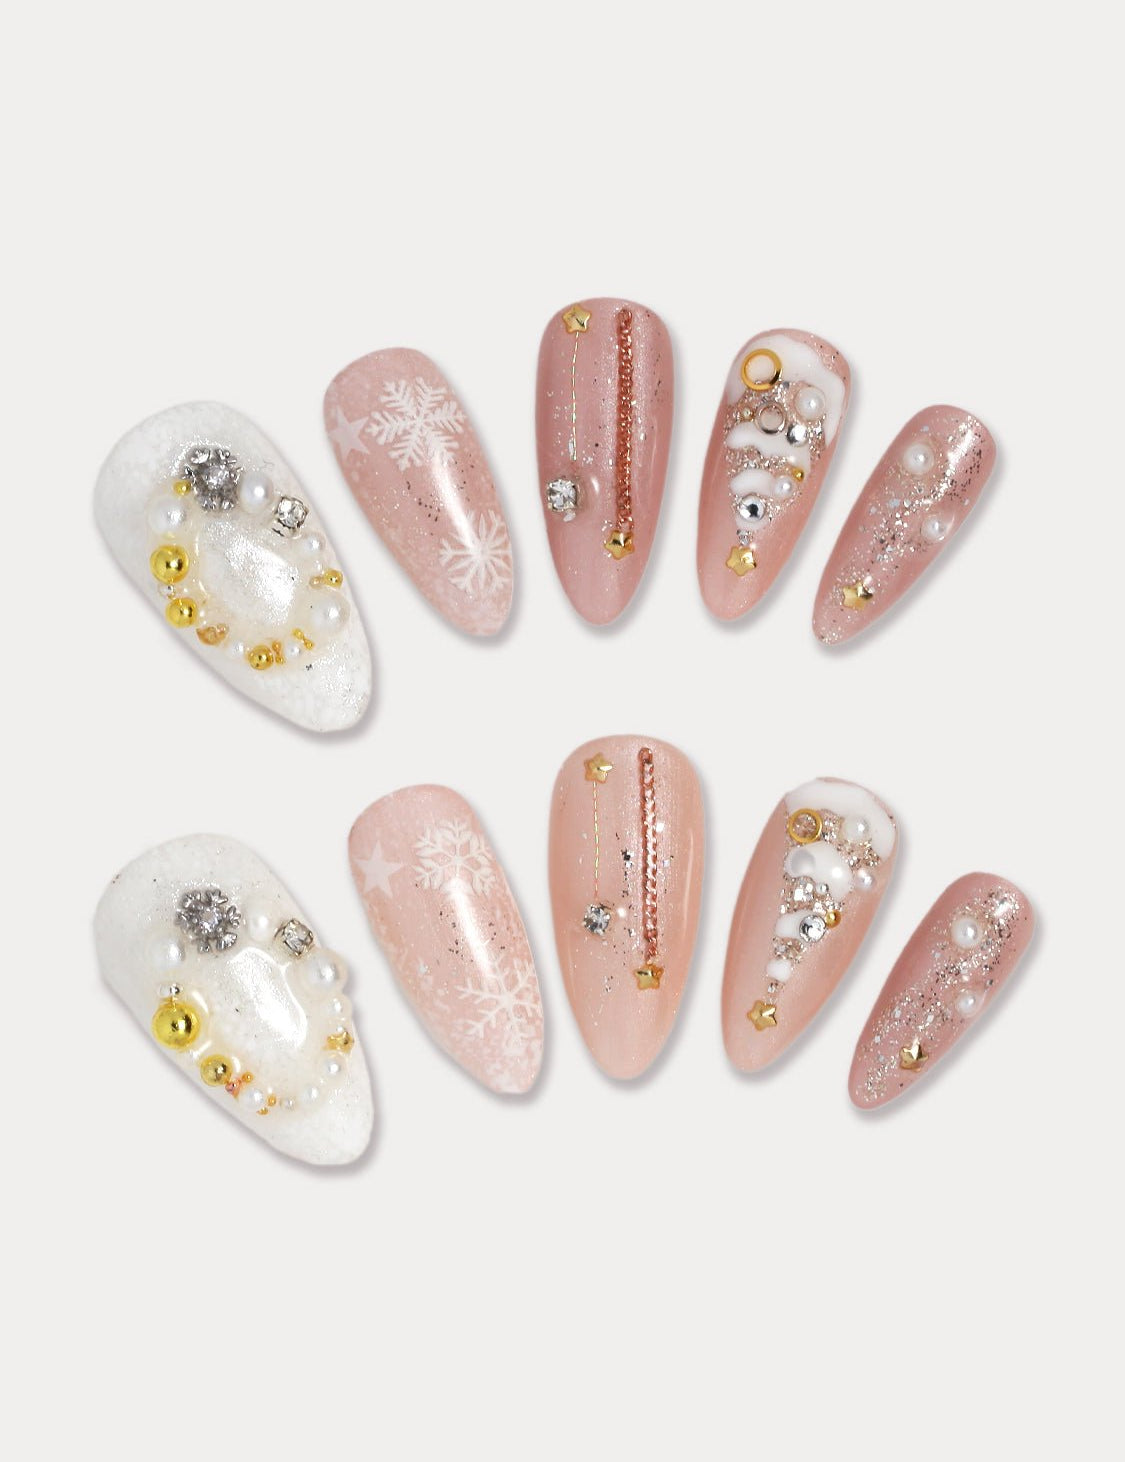 MIEAP Christmas Wreath press on nail set features a nude pink base color, complemented by a golden Christmas wreath, snow-covered Christmas trees, glistening snowflakes floating outside the window, and golden twinkling holiday lights, creating an atmosphere filled with girlish charm. #MIEAP #MIEAPnails #pressonnail #falsenail #acrylicnail #nails #nailart #naildesign #nailinspo #handmadenail #nail2023 #christmasnail  #datingnail #promnail